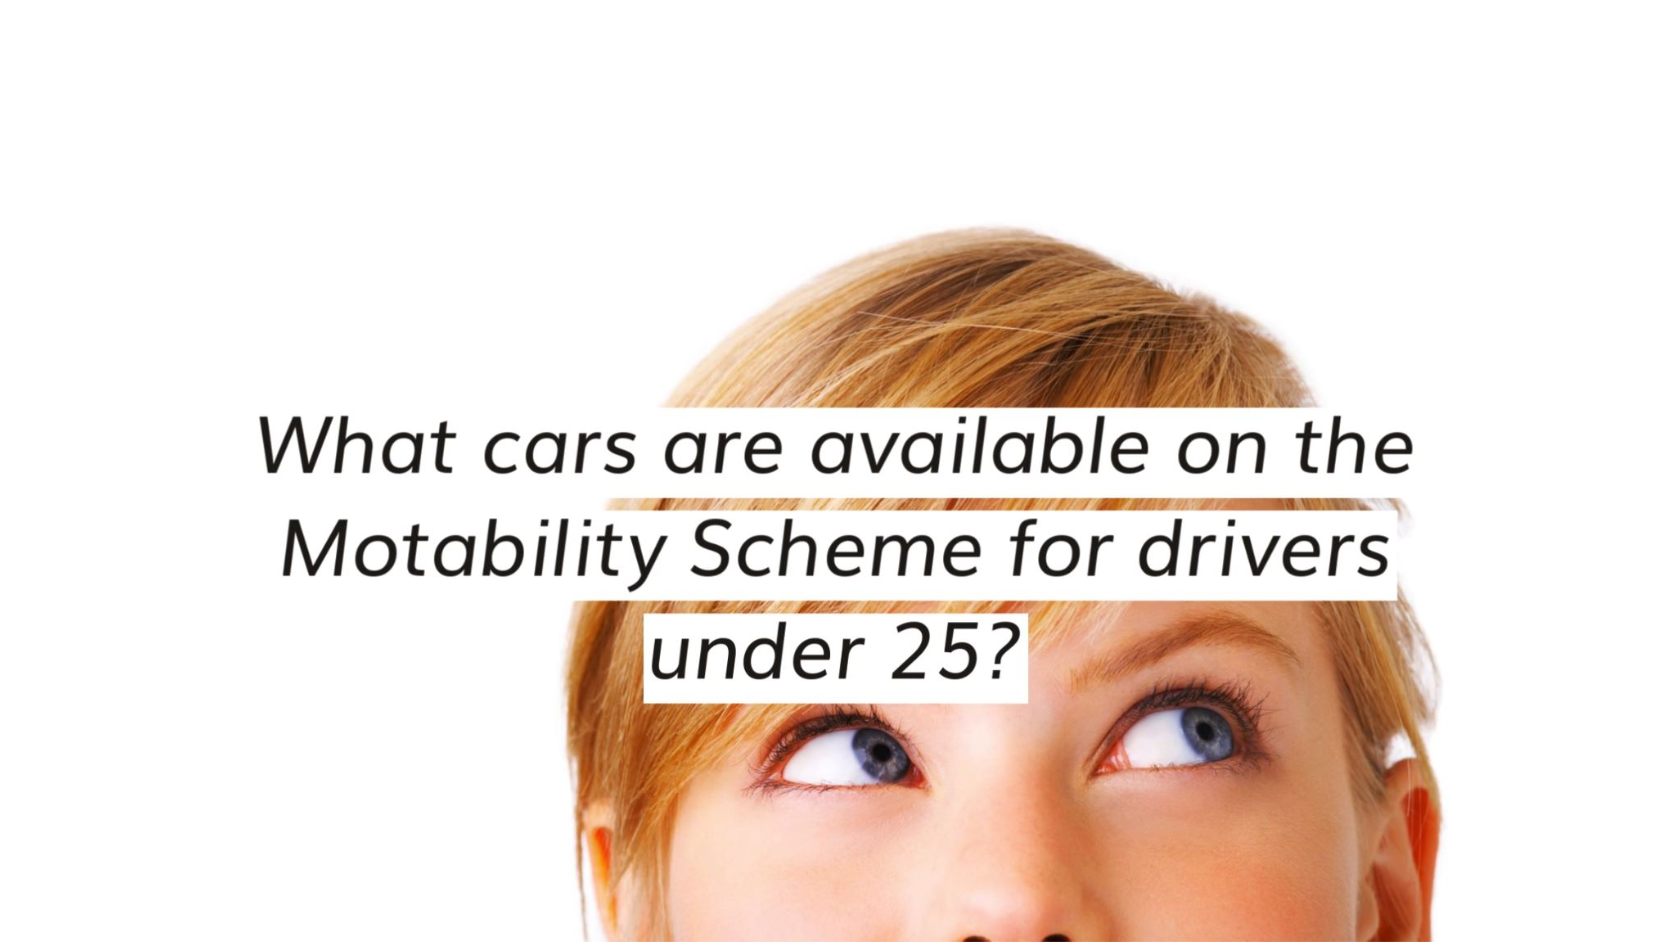 Motability Cars for Drivers Under 25 image